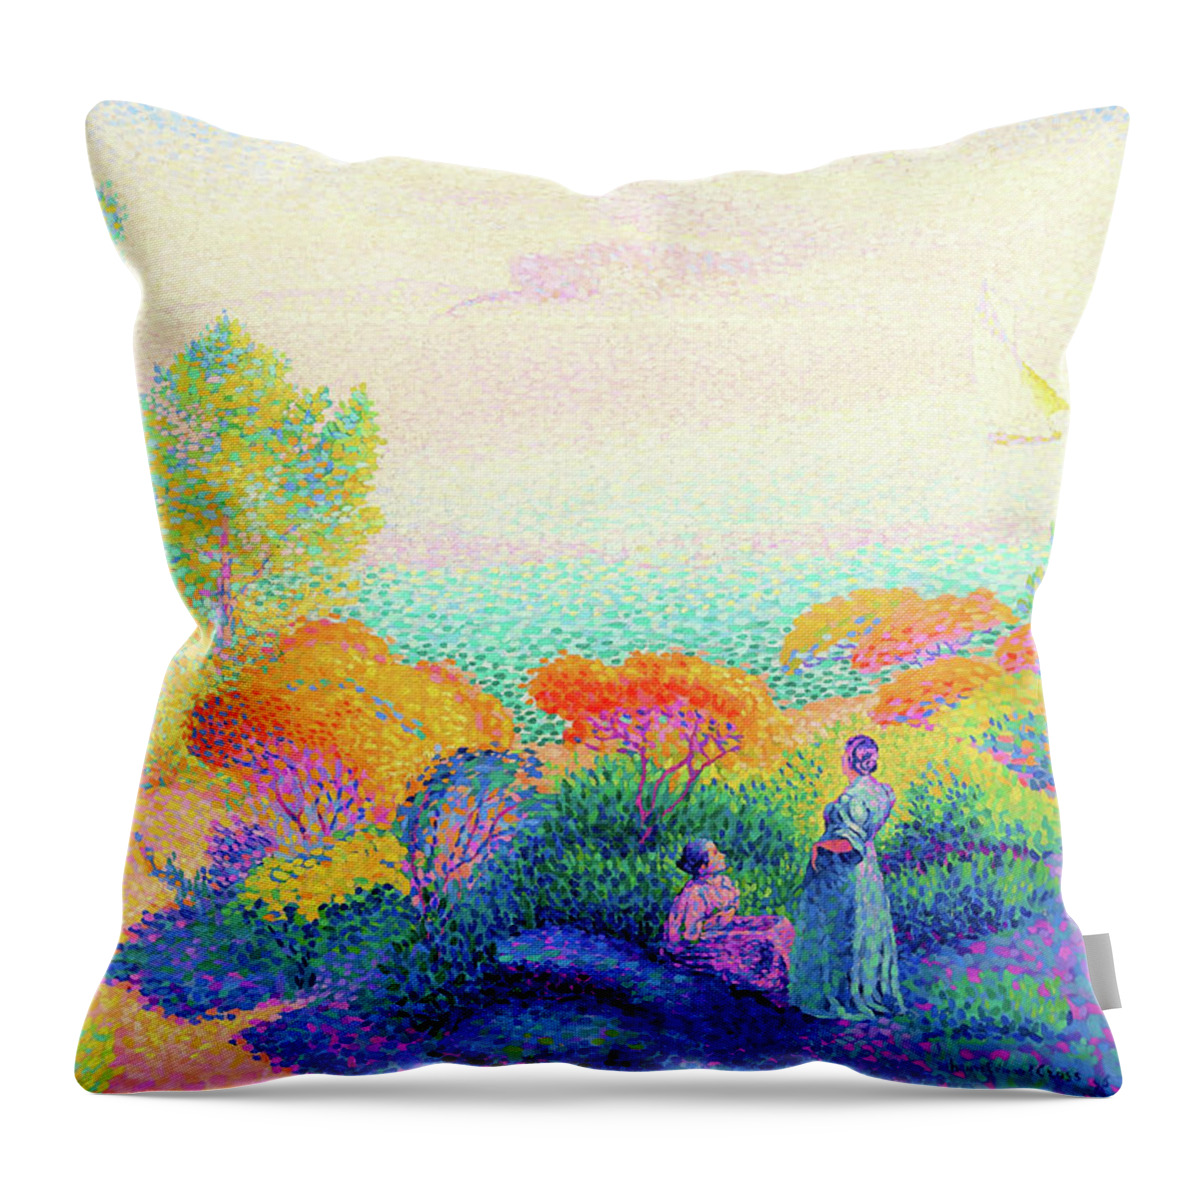 Two Women By The Shore Throw Pillow featuring the painting Two Women by the Shore, Mediterranean - Digital Remastered Edition by Henri Edmond Cross